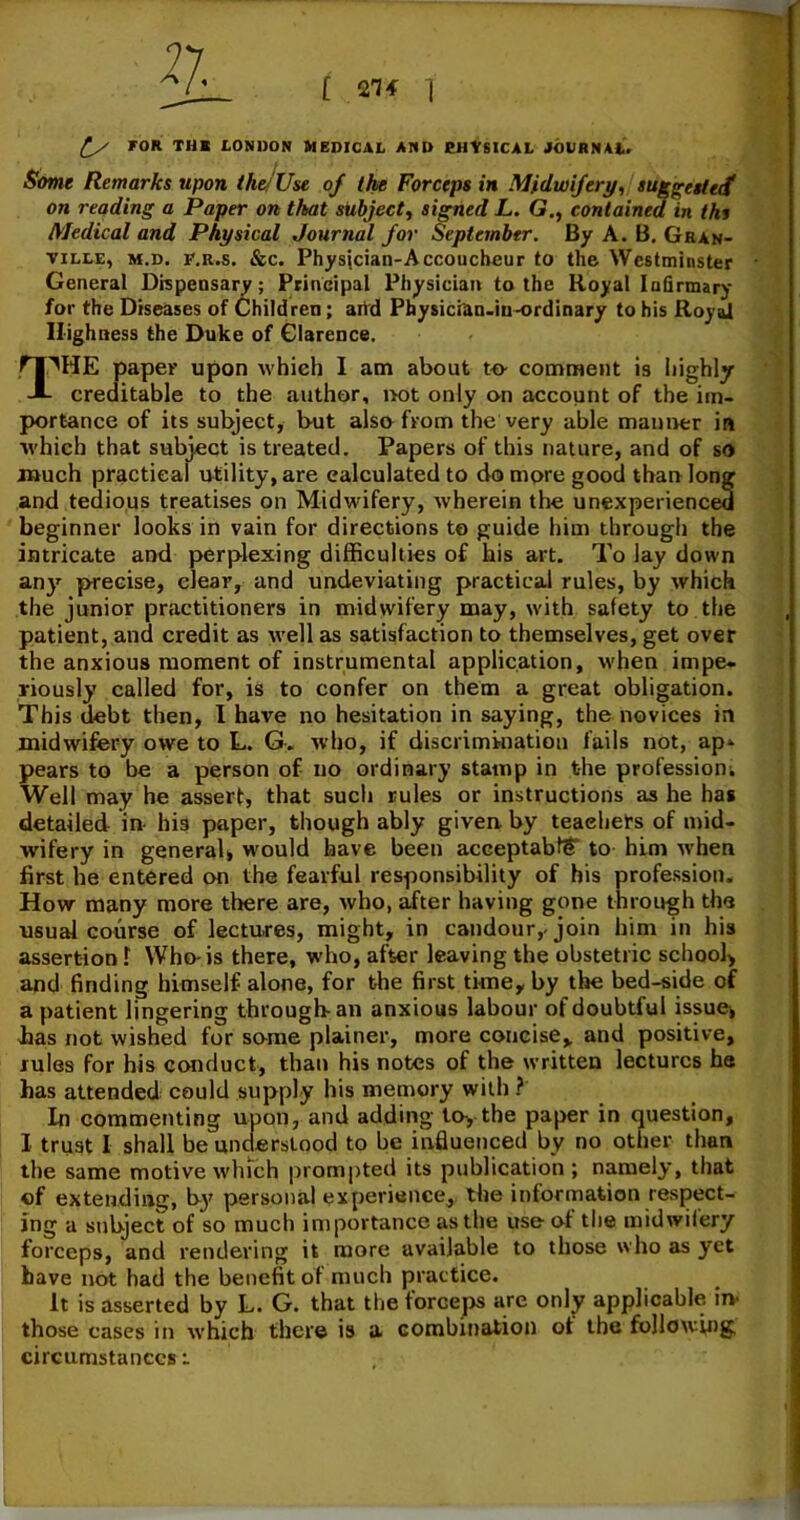 Some Remarks upon the/Use 0/ the Forceps in Midwifery, suggested on reading a Paper on that subject, signed L. G., contained in thi Medical and Physical Journal for September. By A. B. Gran- ville, m.d. f.r.s. &c. Physician-Accoucheur to the Westminster General Dispensary; Principal Physician to the Royal Infirmary for the Diseases of Children; arid Physician-iu-ordinary to his Royal Highness the Duke of Clarence. nPHE paper upon which I am about to comment is highly A creditable to the author, not only on account of the im- portance of its subject, but also from the very able maimer in which that subject is treated. Papers of this nature, and of so much practical utility, are calculated to do more good than long and tedious treatises on Midwifery, wherein the unexperienced beginner looks in vain for directions to guide him through the intricate and perplexing difficulties of his art. To lay down any precise, clear, and undeviating practical rules, by which the junior practitioners in midwifery may, with safety to the patient, and credit as well as satisfaction to themselves, get over the anxious moment of instrumental application, when impe- riously called for, is to confer on them a great obligation. This debt then, I have no hesitation in saying, the novices in midwifery owe to L. G> who, if discrimination fails not, ap» pears to be a person of no ordinary stamp in the profession^ Well may he assert, that such rules or instructions as he has detailed in- his paper, though ably given by teaehers of mid- wifery in general, would have been acceptably to him when first he entered on the fearful responsibility of his profession. How many more there are, who, after having gone through the usual course of lectures, might, in candour,, join him in his assertion 1 Who-is there, who, after leaving the obstetric school, and finding himself alone, for the first time, by the bed-side of a patient lingering through an anxious labour of doubtful issue, lias not wished for same plainer, more concise, and positive, rules for his conduct, than his notes of the written lectures he has attended could supply his memory with ? In commenting upon, and adding to, the paper in question, I trust I shall be understood to be influenced by no other than the same motive which prompted its publication; namely, that of extending, b}' personal experience, the information respect- ing a subject of so much importance as the use of the midwifery forceps, and rendering it more available to those who as yet have not had the benefit of much practice. It is asserted by L. G. that the forceps are only applicable in- those cases in which there is a combination of the following,